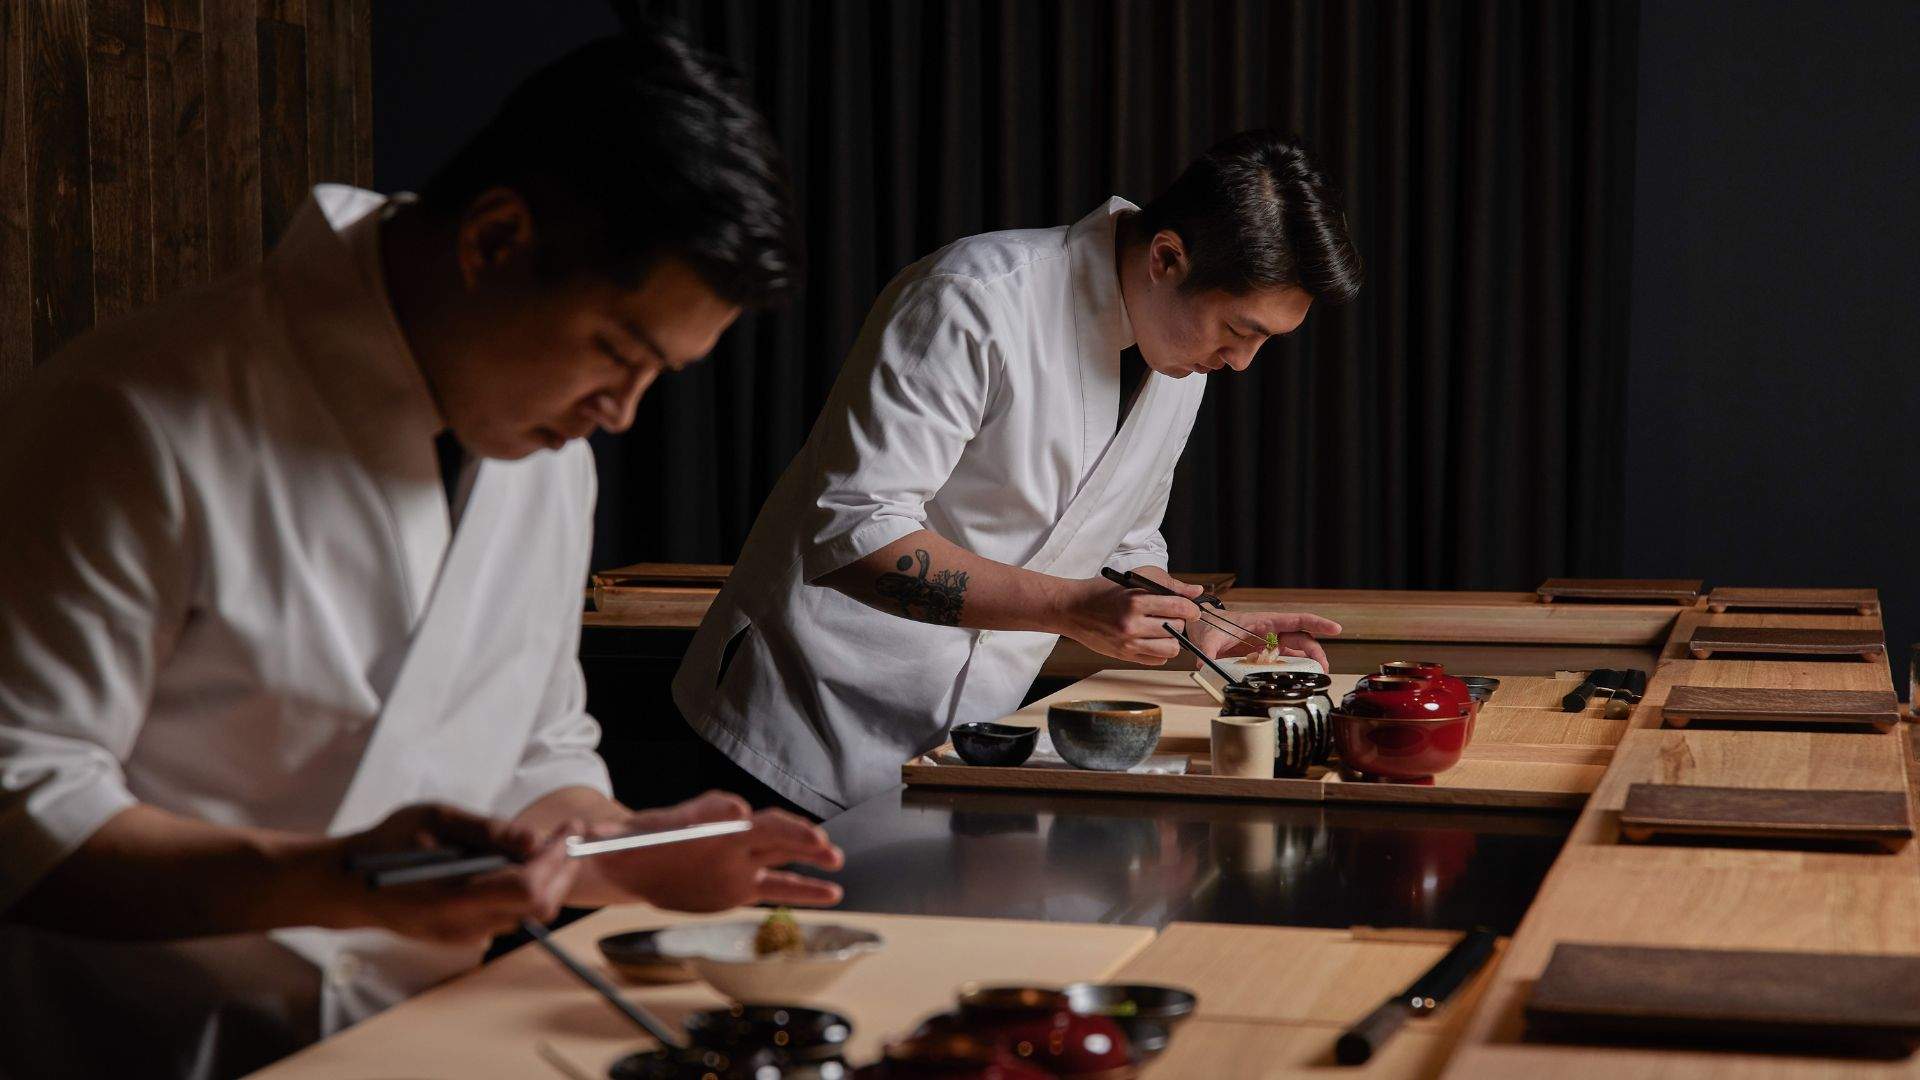 Two chefs preparing food at Aoi Tsuki, South Yarra. Home to some of the best omakase in Melbourne.